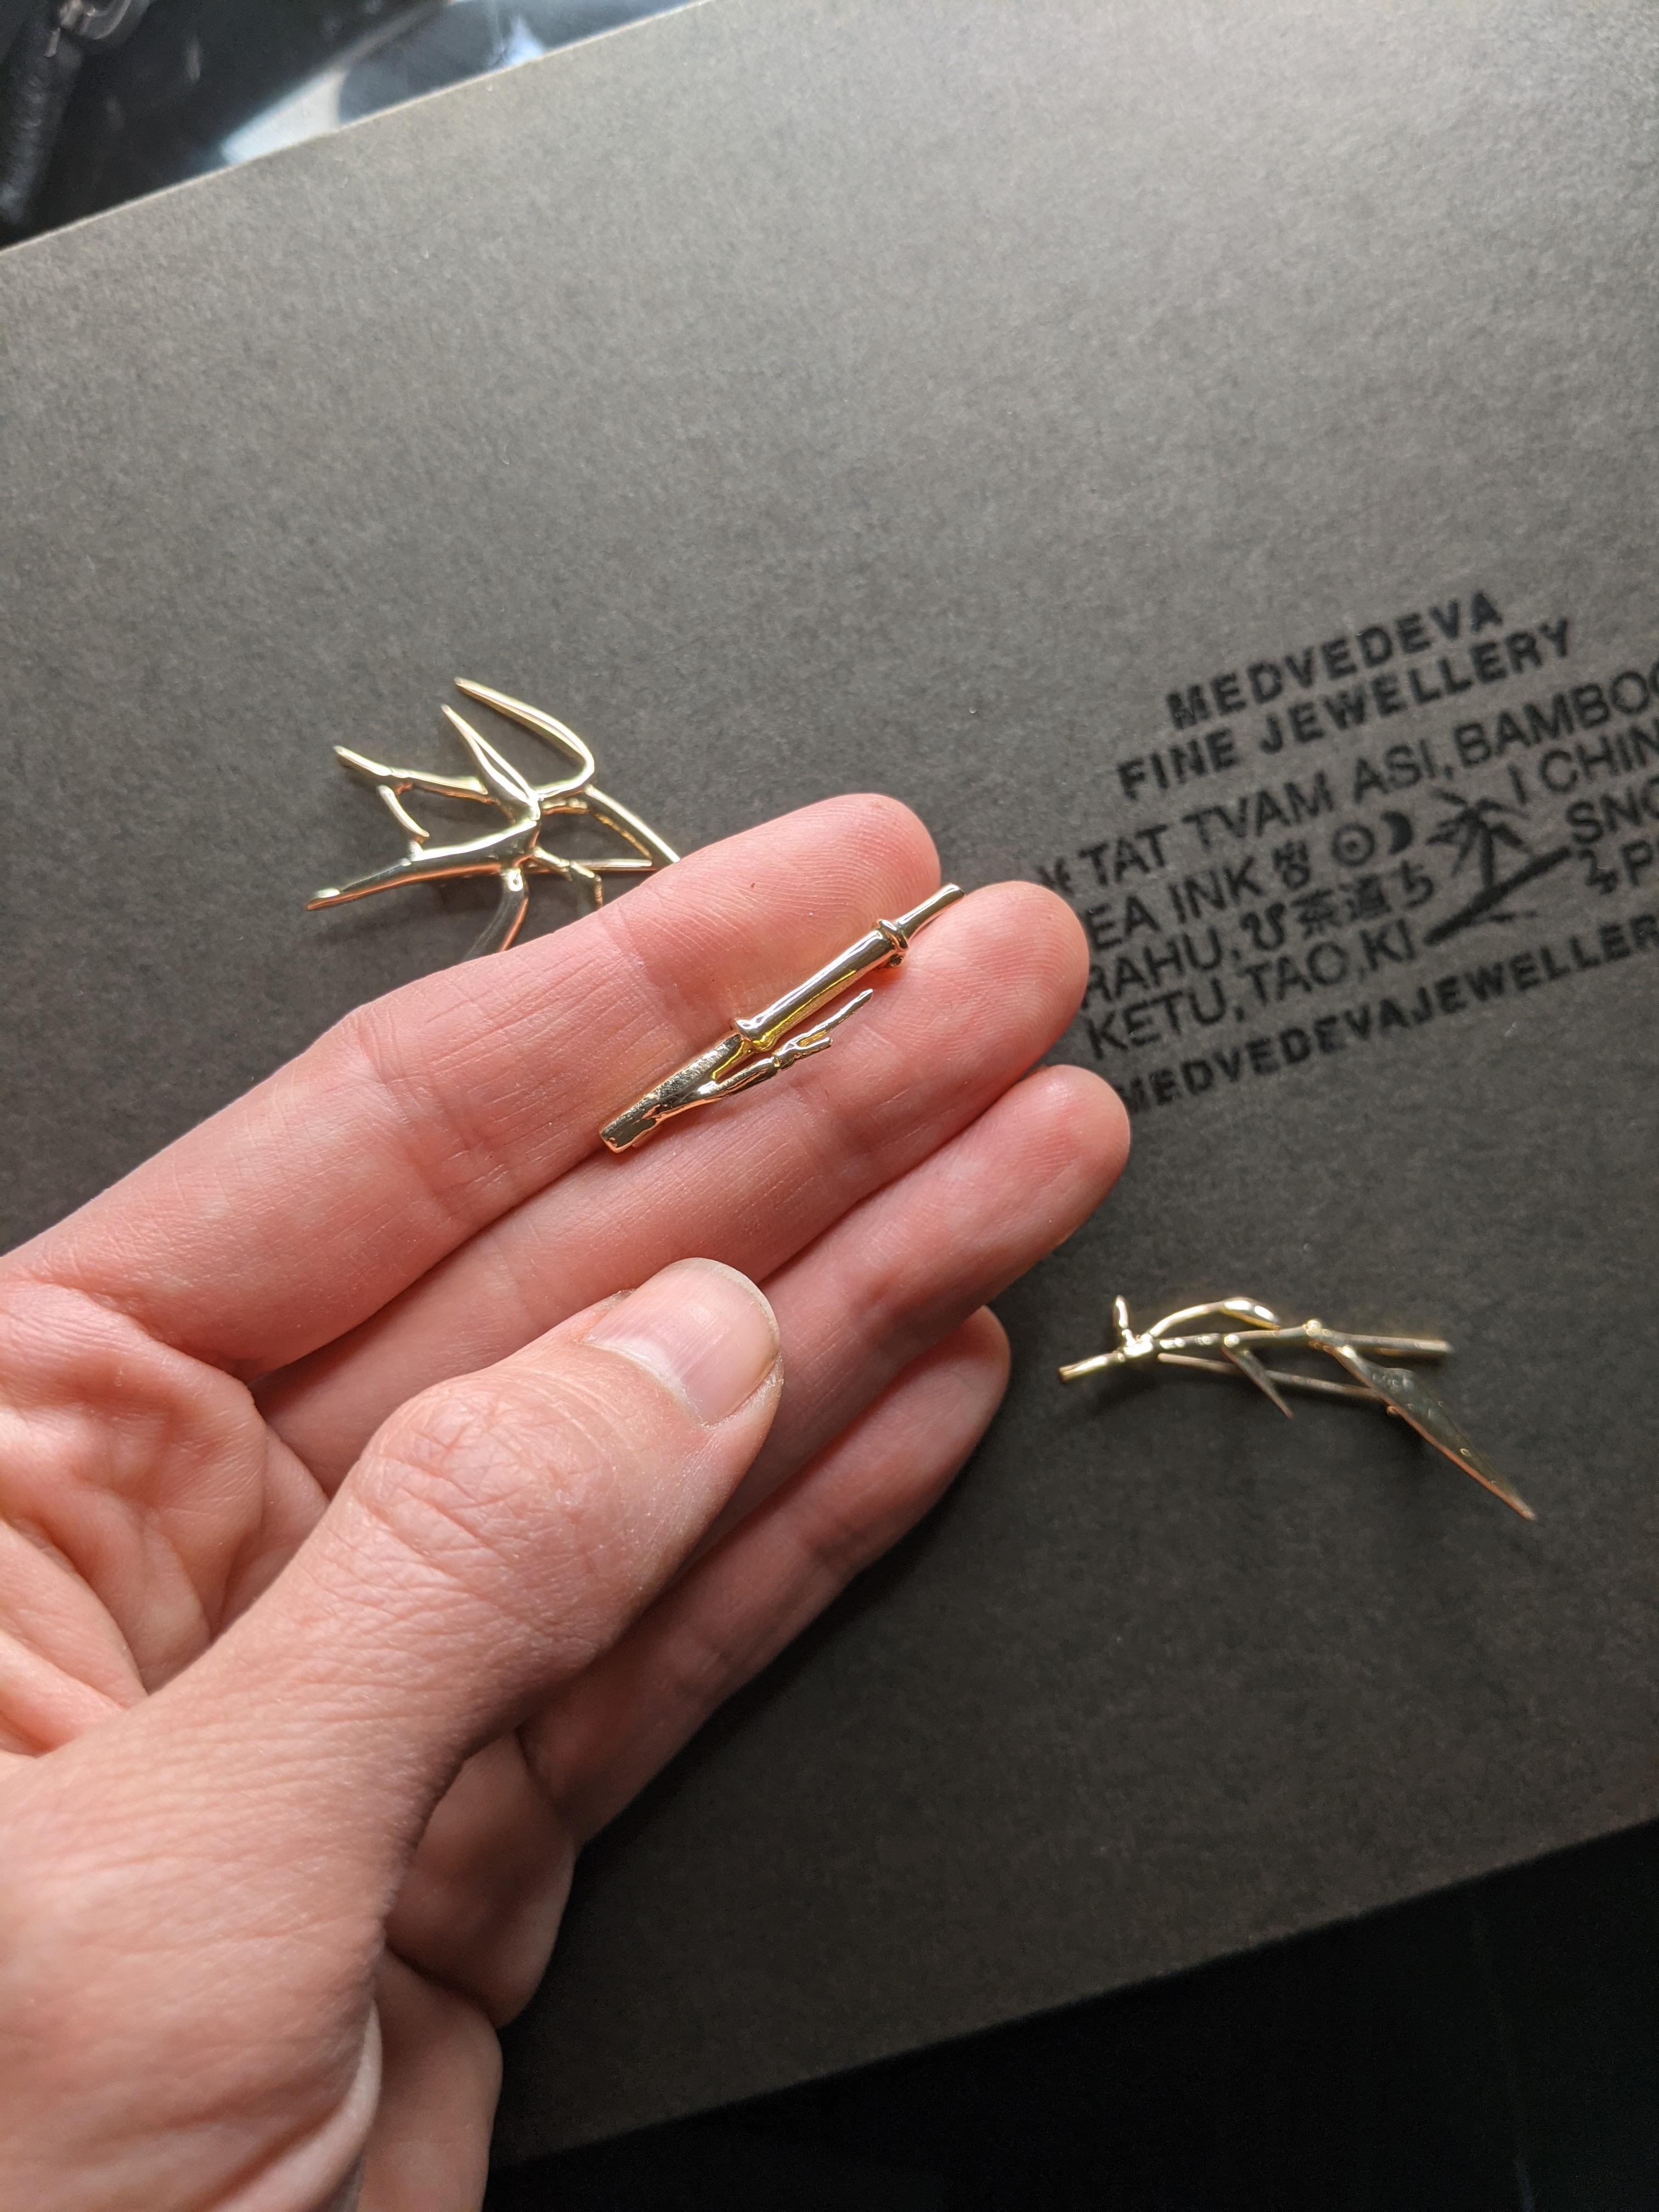 This 14-karat yellow gold contemporary brooch, N2, is part of the Bamboo triptych, and can be worn in multiple ways to create a Chinese calligraphy effect. It has been featured in Vogue UA and Elle UA magazines.

The brooch is a contemporary jewelry